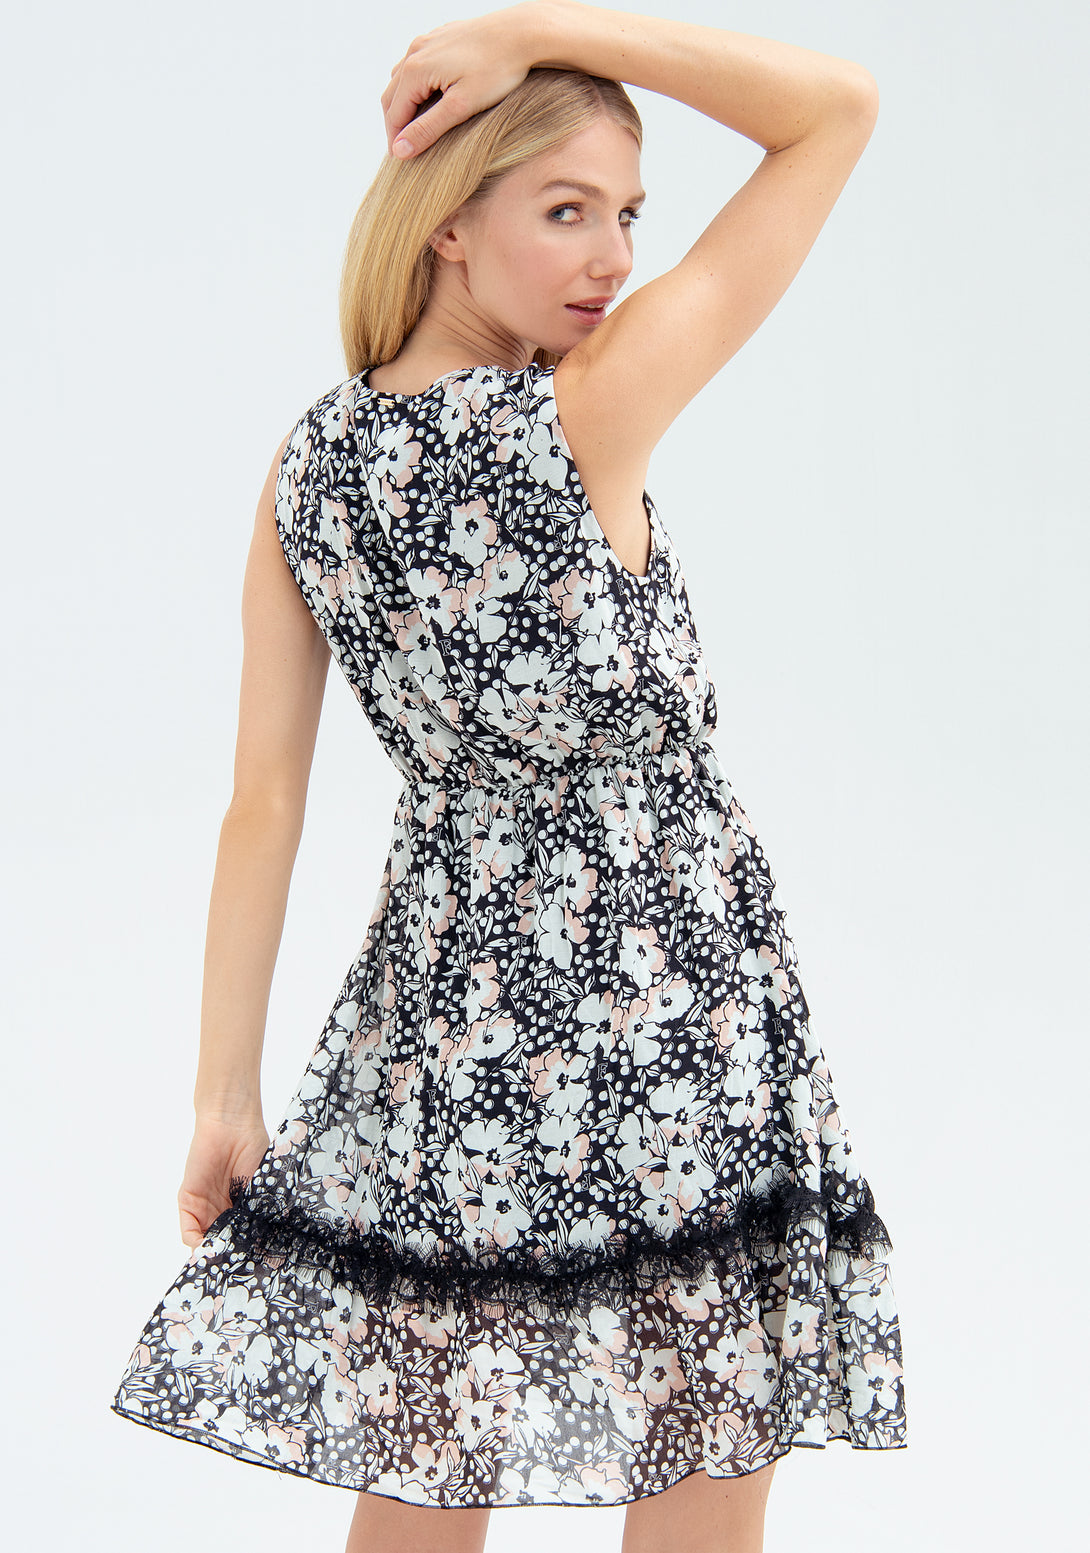 Dress with flowery pattern and no sleeves